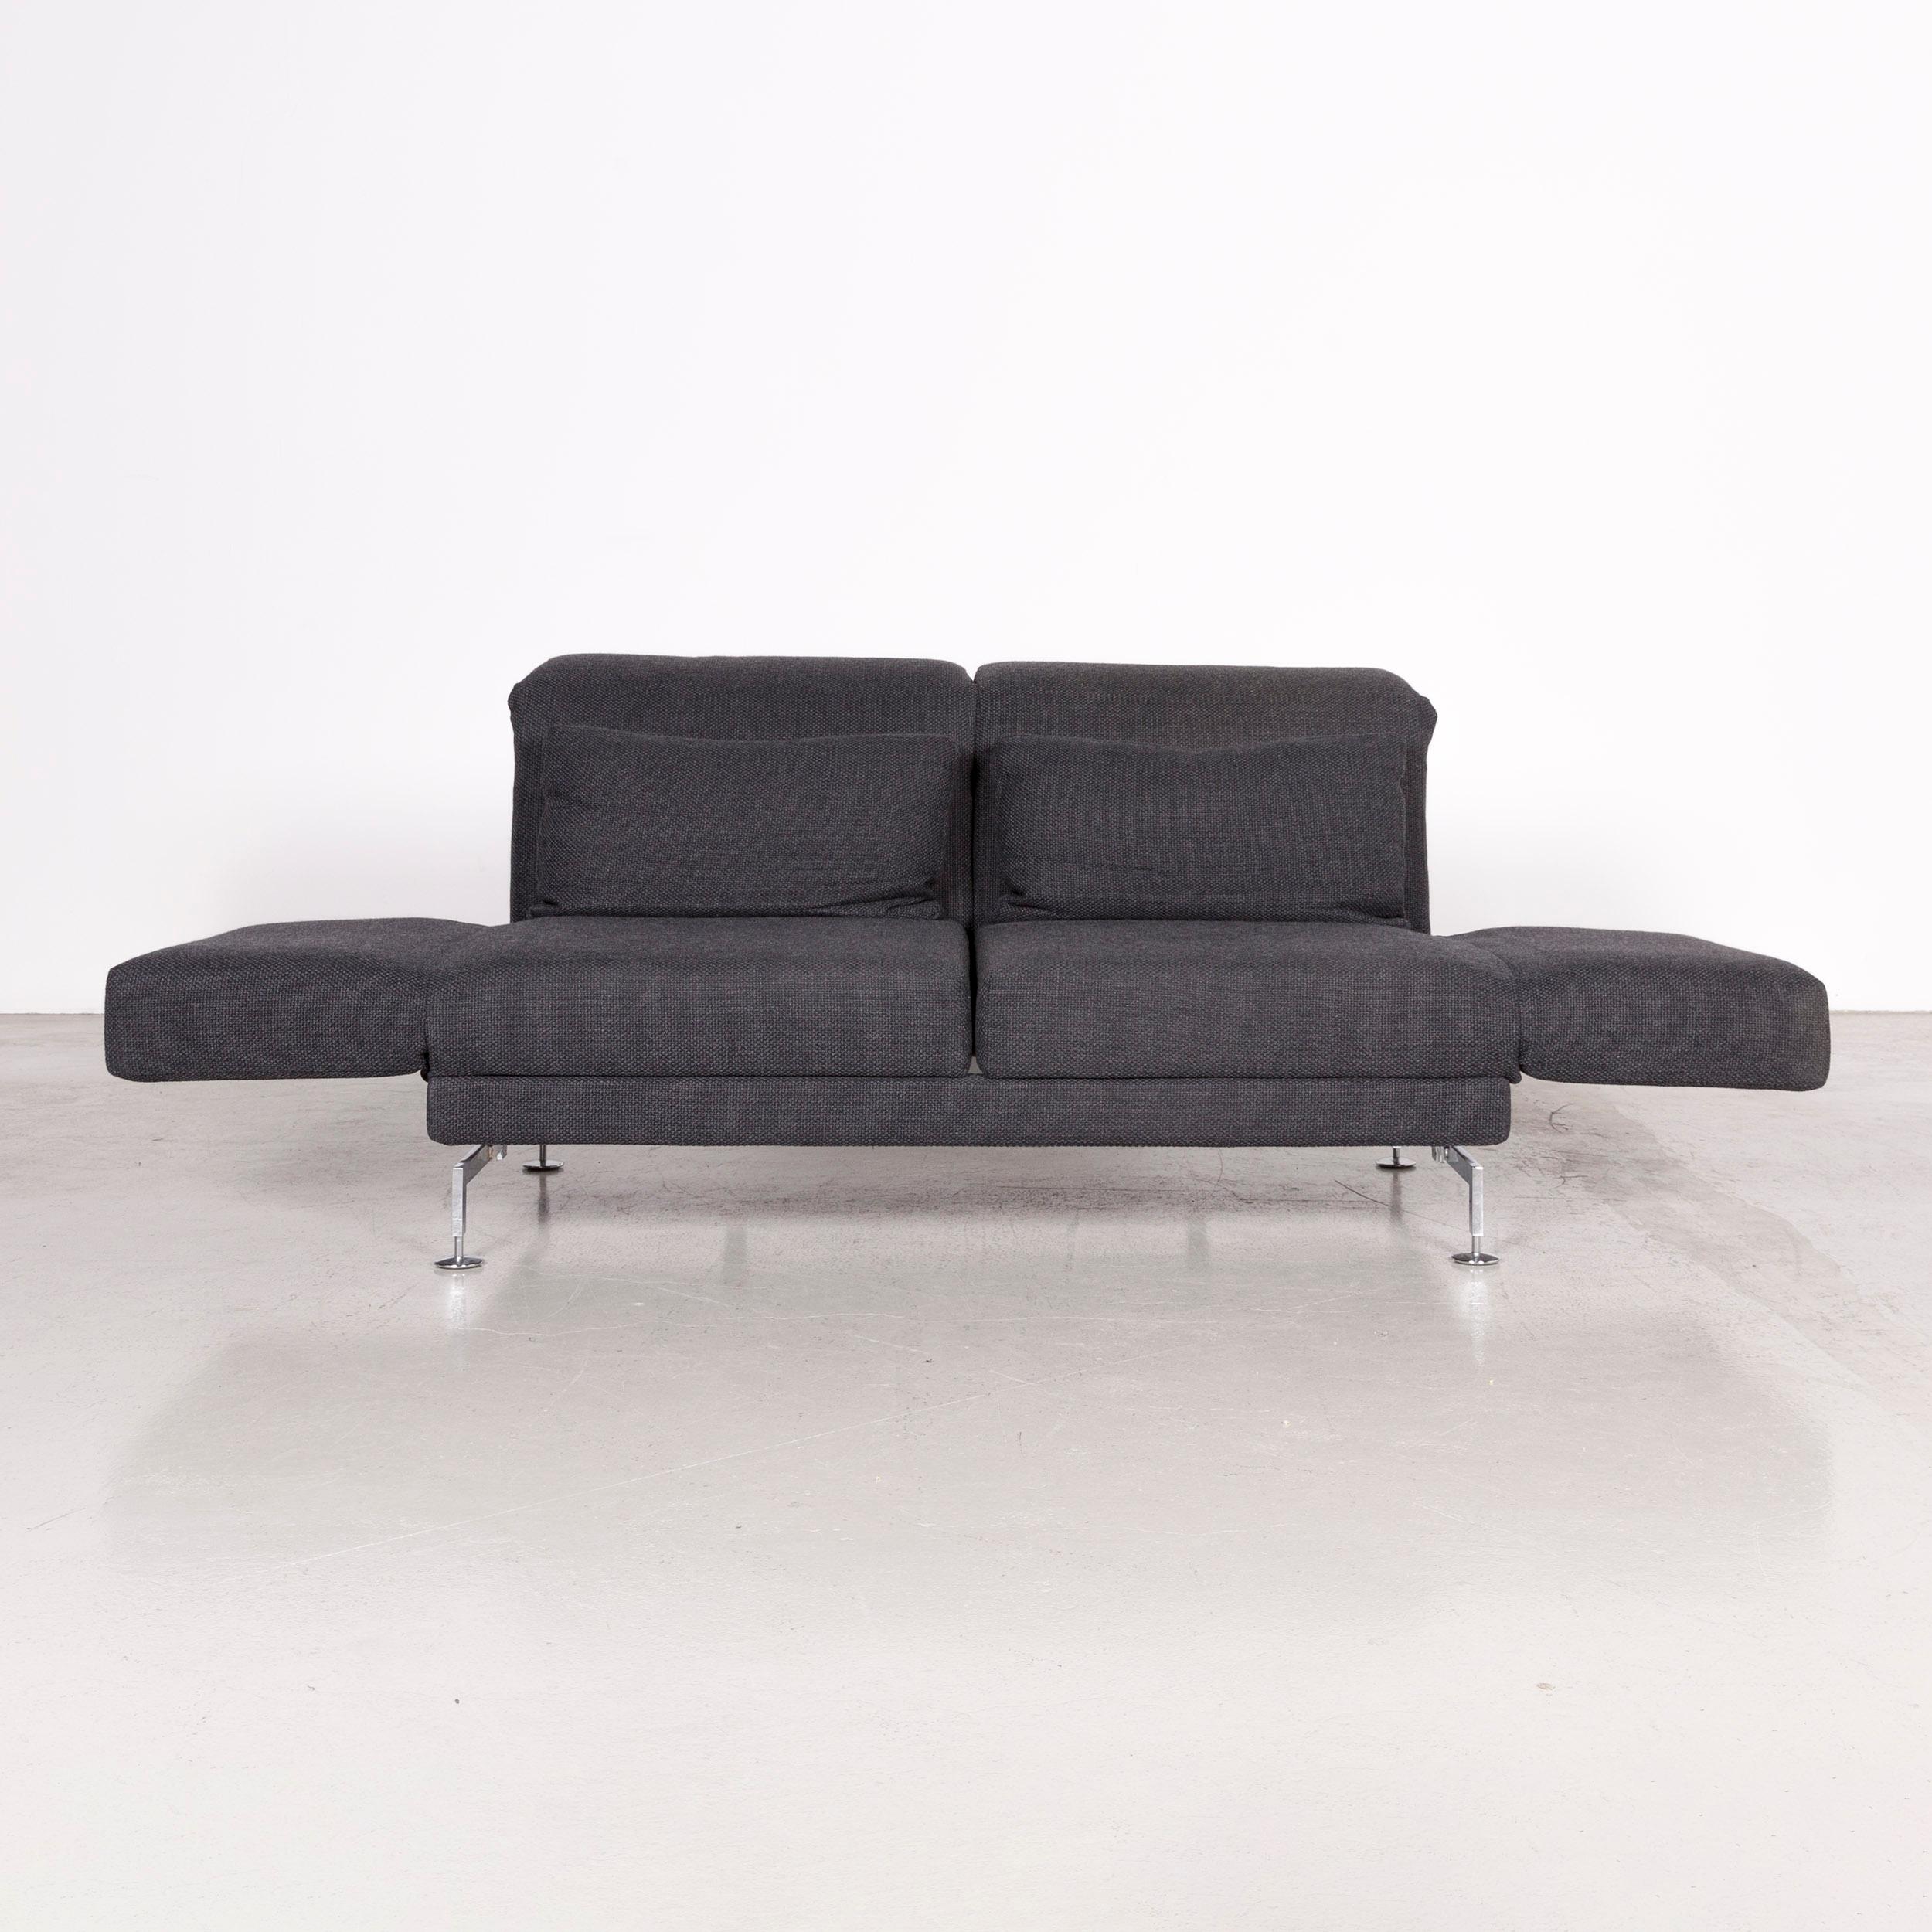 Brühl & Sippold Moule Designer Fabric Sofa Grey Three-Seat Couch with Function In Good Condition For Sale In Cologne, DE